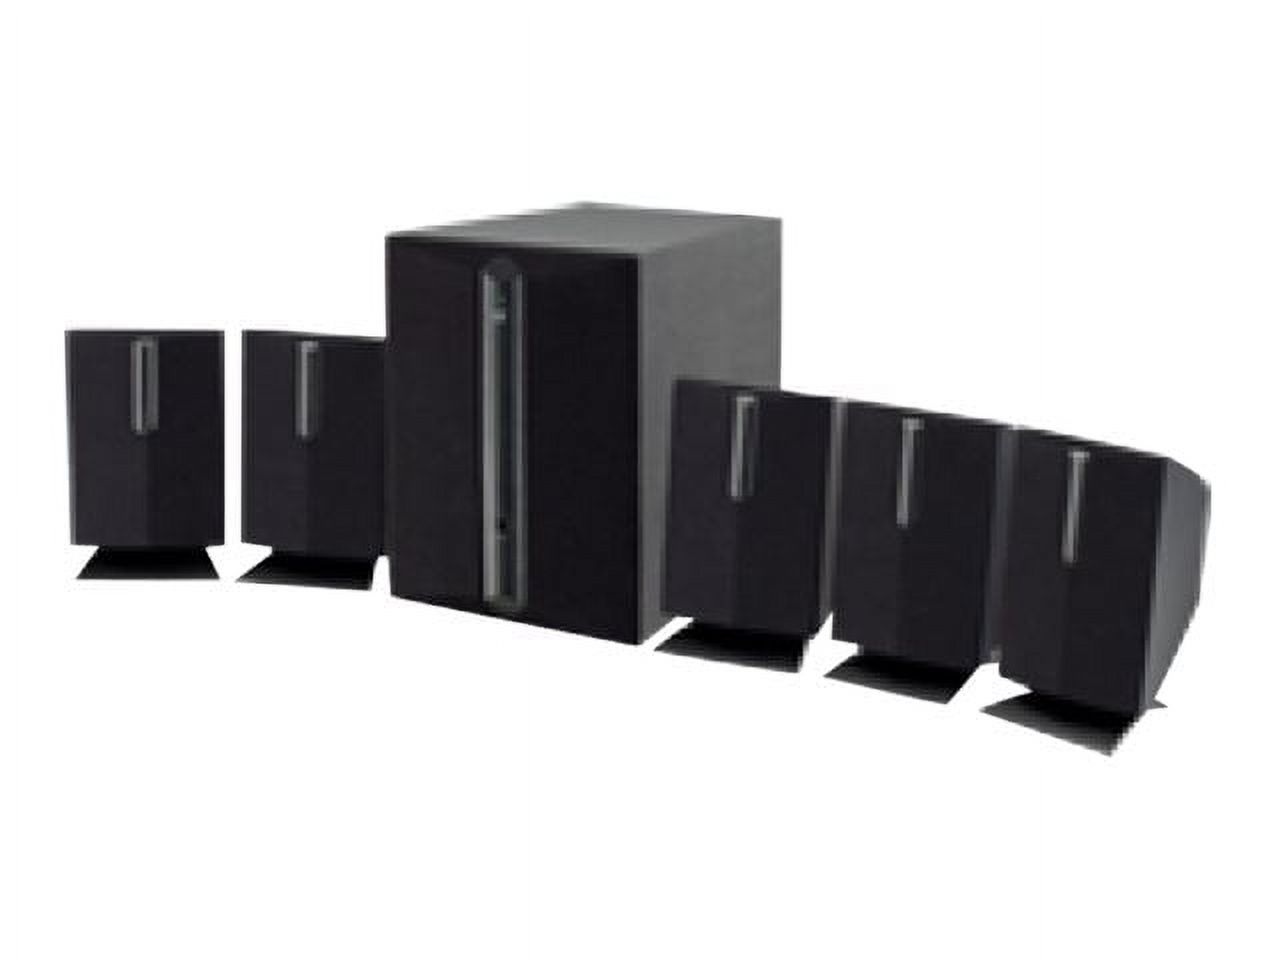 GPX HT050B 5.1-Channel Home Theater Speaker System - image 3 of 3